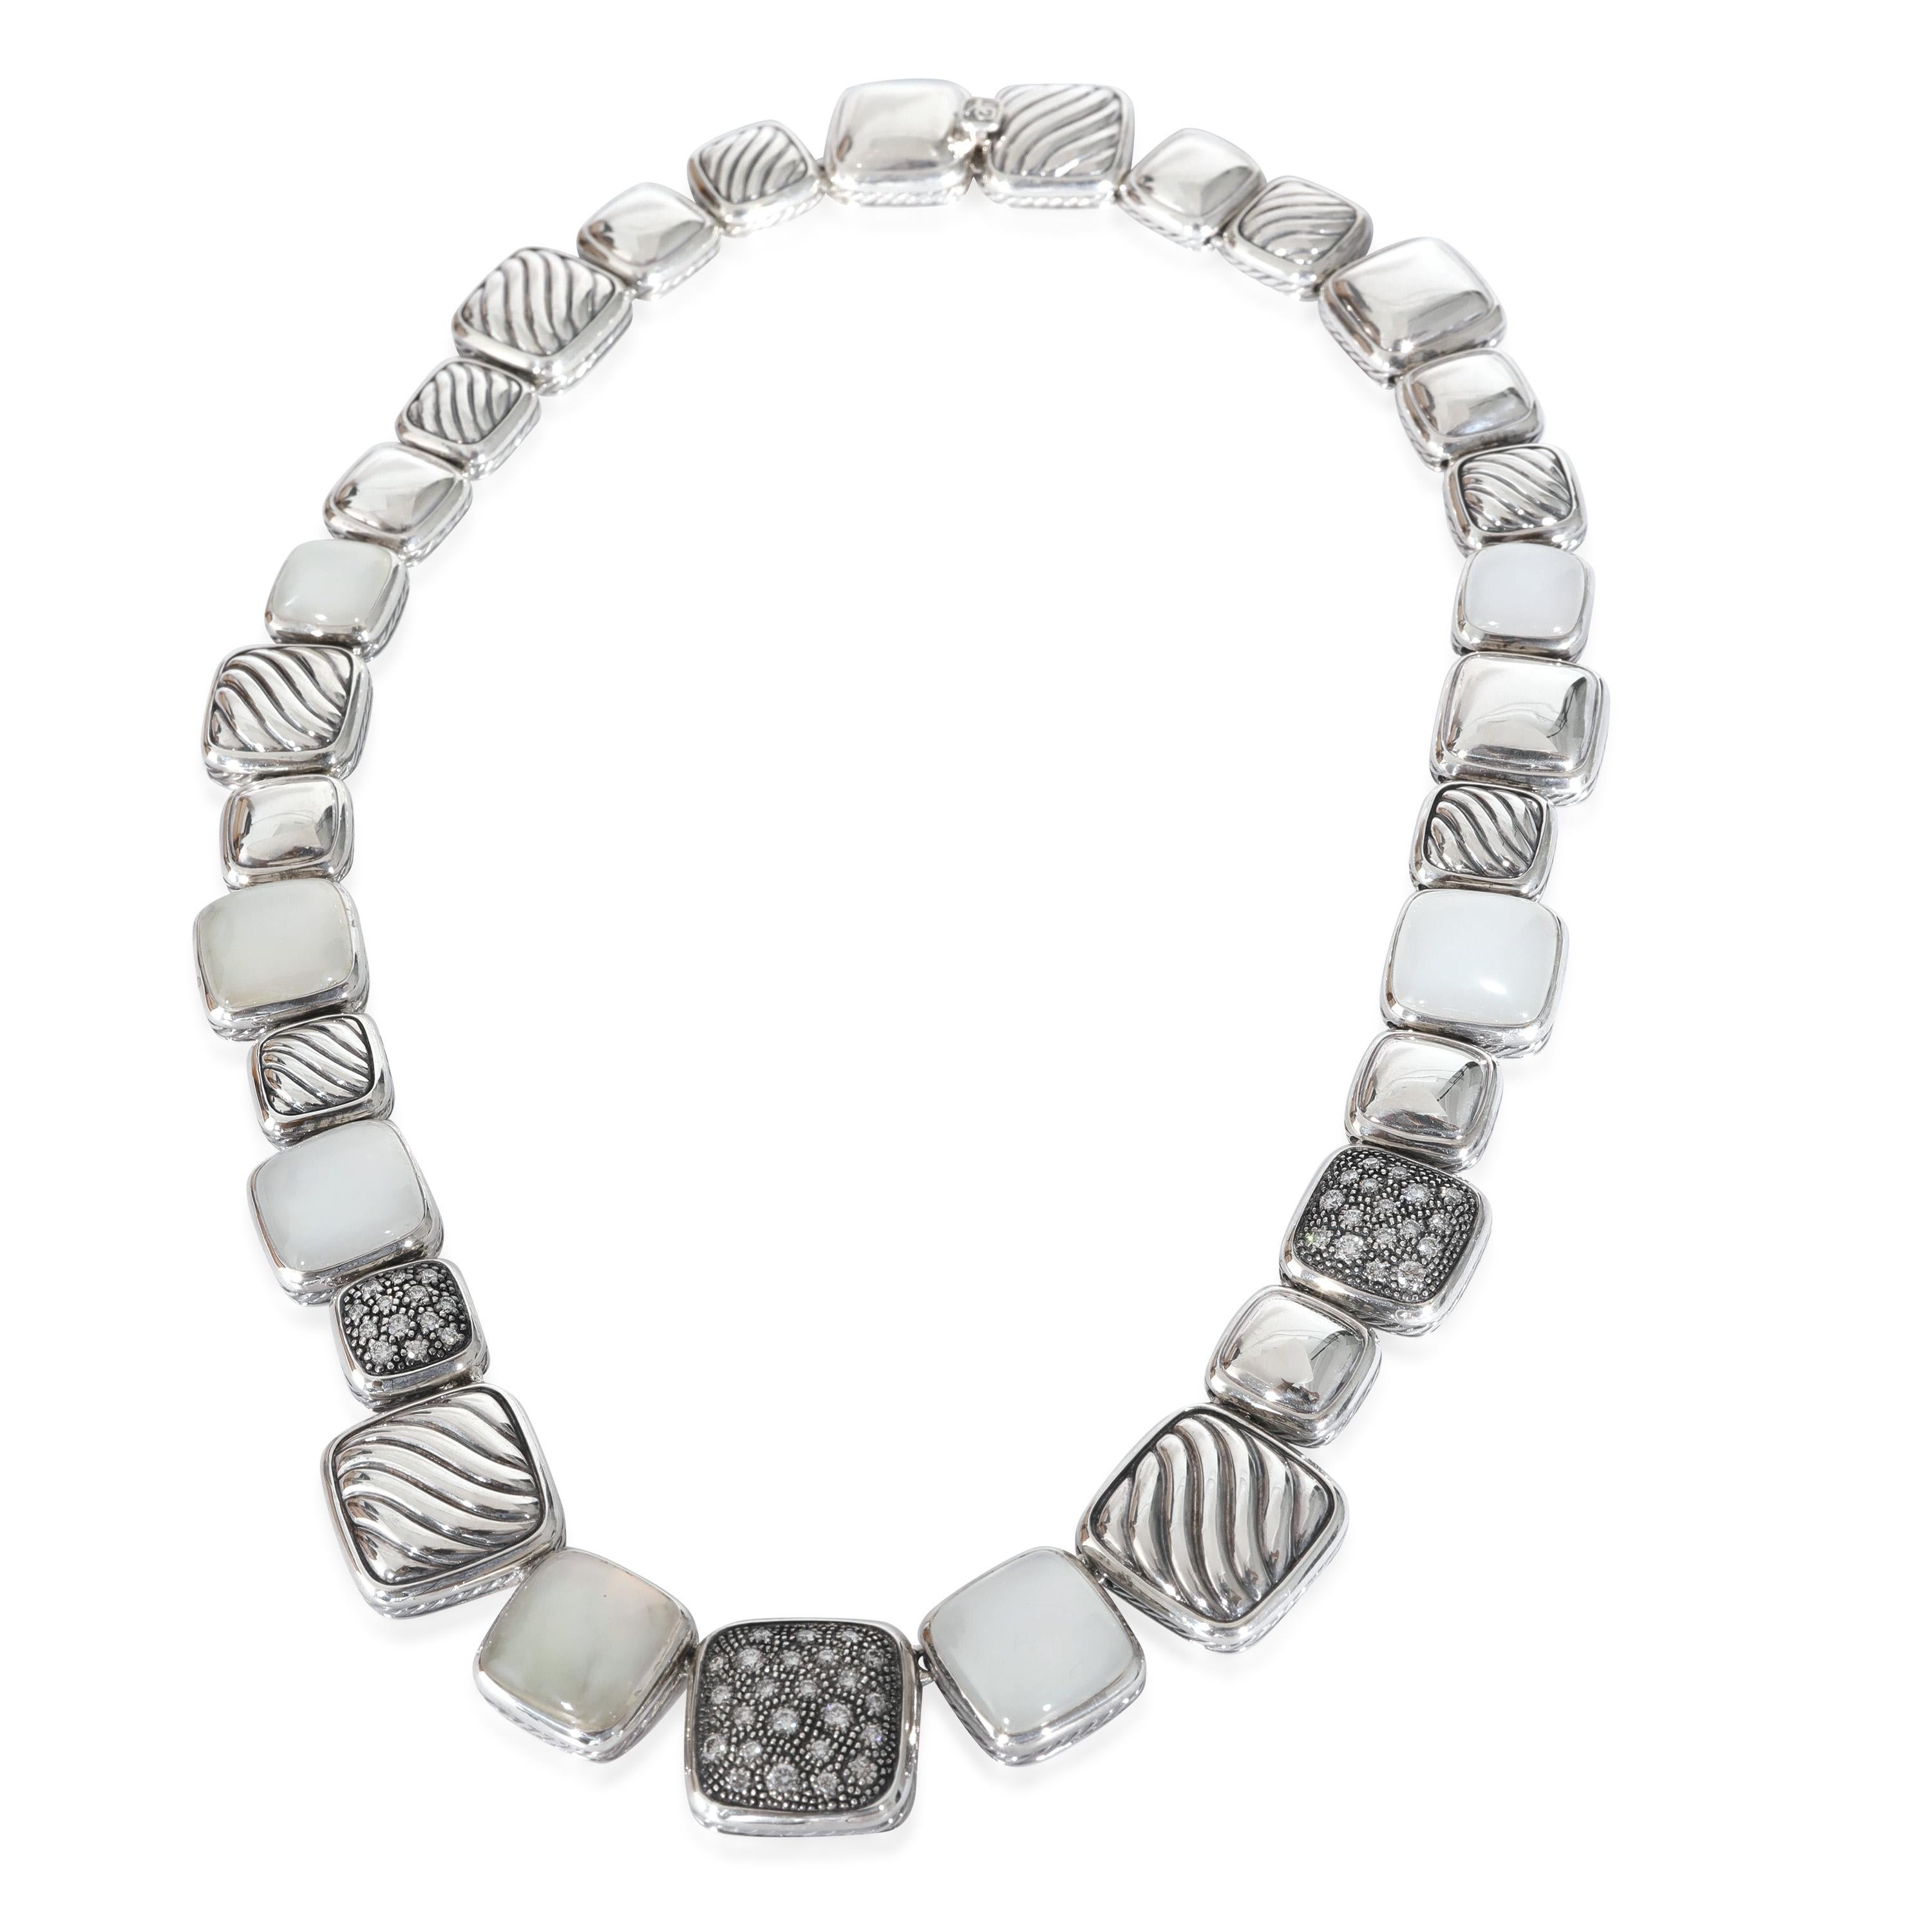 David Yurman Chiclet Diamond Necklace in  Sterling Silver 0.73 CTW

PRIMARY DETAILS
SKU: 131675
Listing Title: David Yurman Chiclet Diamond Necklace in  Sterling Silver 0.73 CTW
Condition Description: Retails for 4700 USD. In excellent condition and